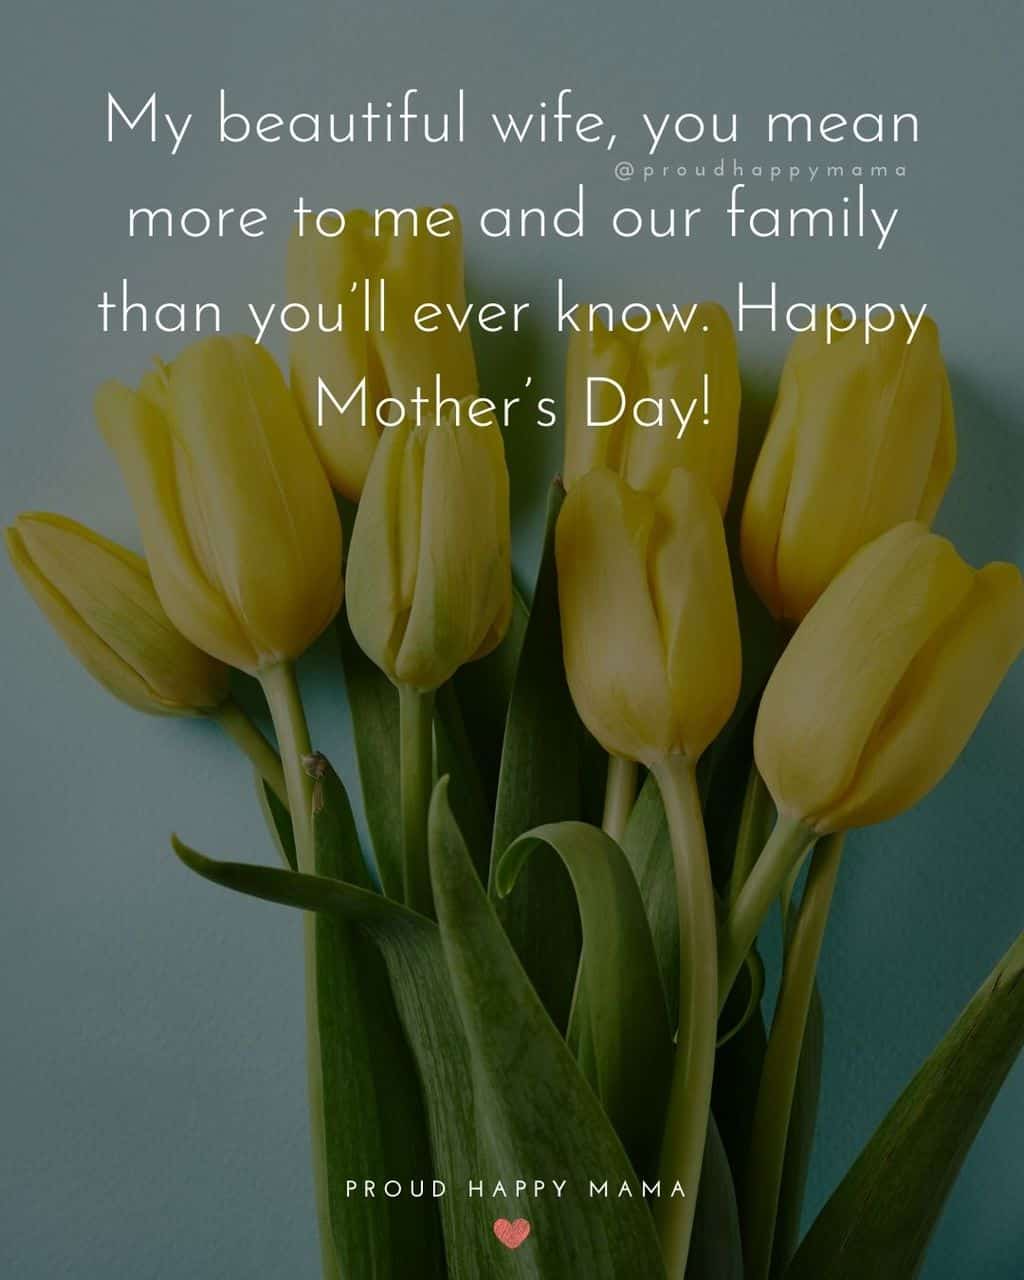 Happy Mothers Day Quotes For Wife - My beautiful wife, you mean more to me and our family than you’ll ever know. Happy